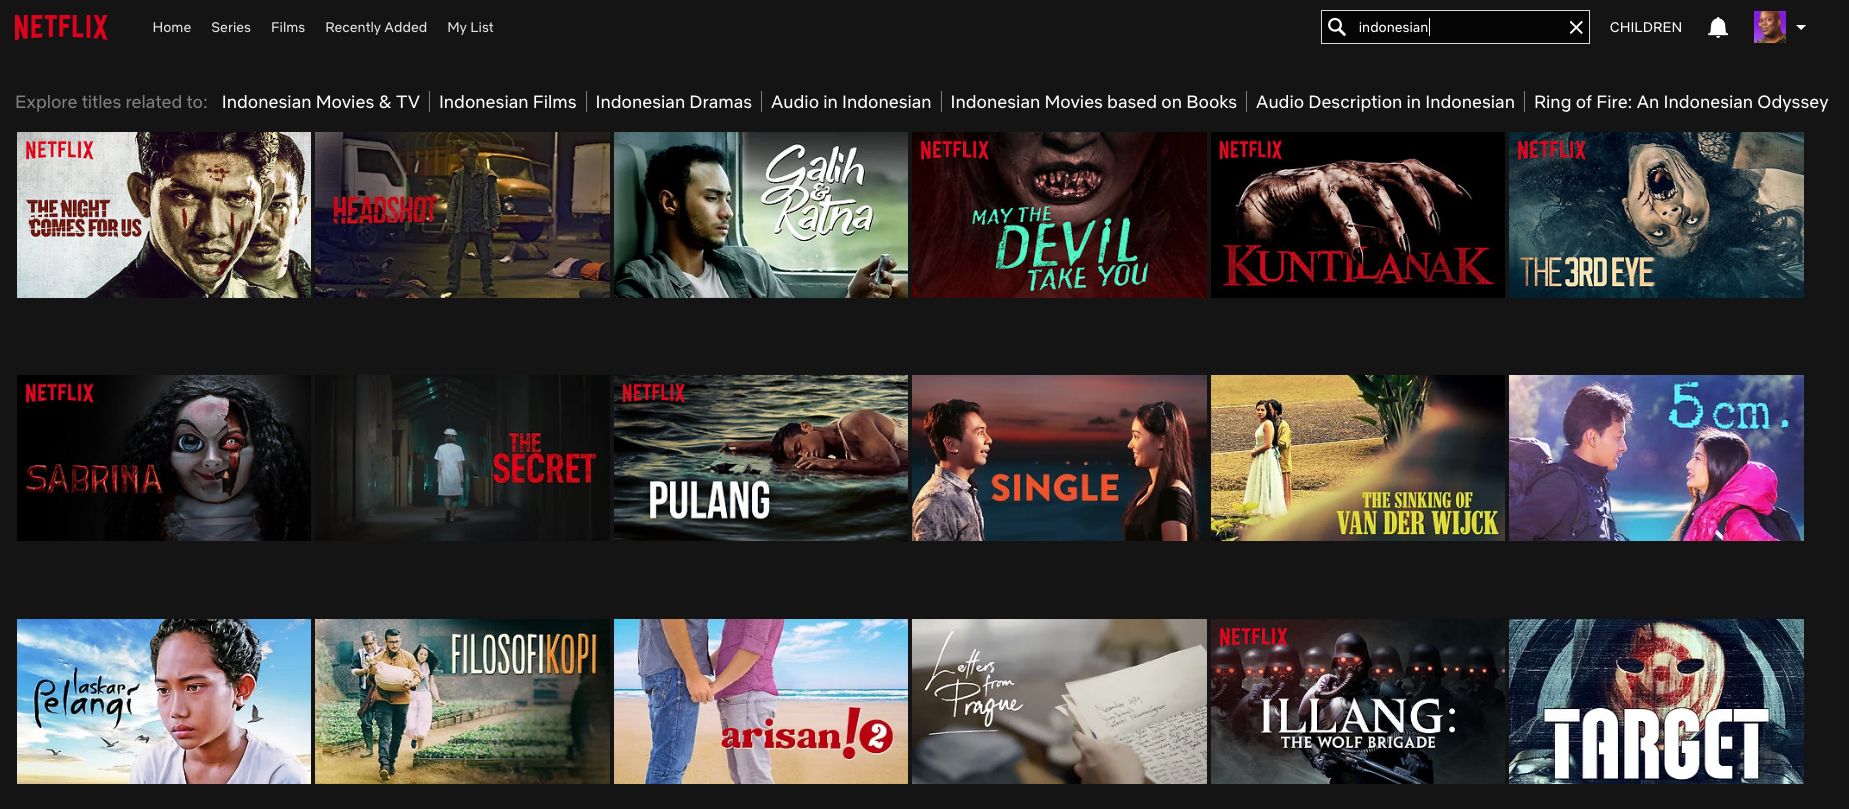 Going beyond a simple binge watch, Netflix for language learning is great. Here's the Ultimate Guide to Netflix for language learning + your free Netflix Study Pack for Language Learners. ➔